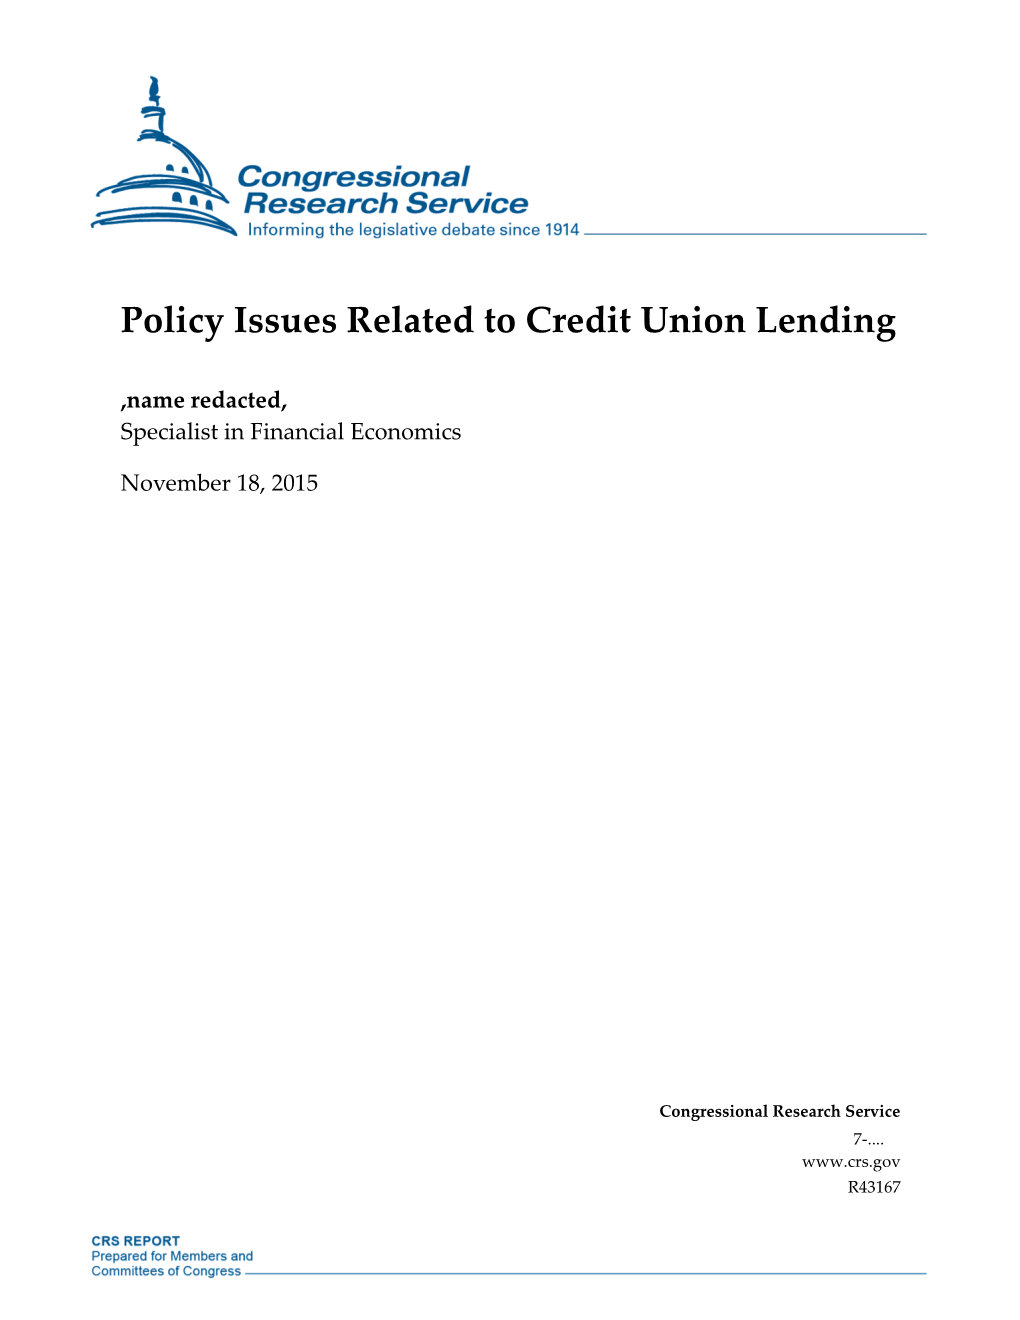 Policy Issues Related to Credit Union Lending